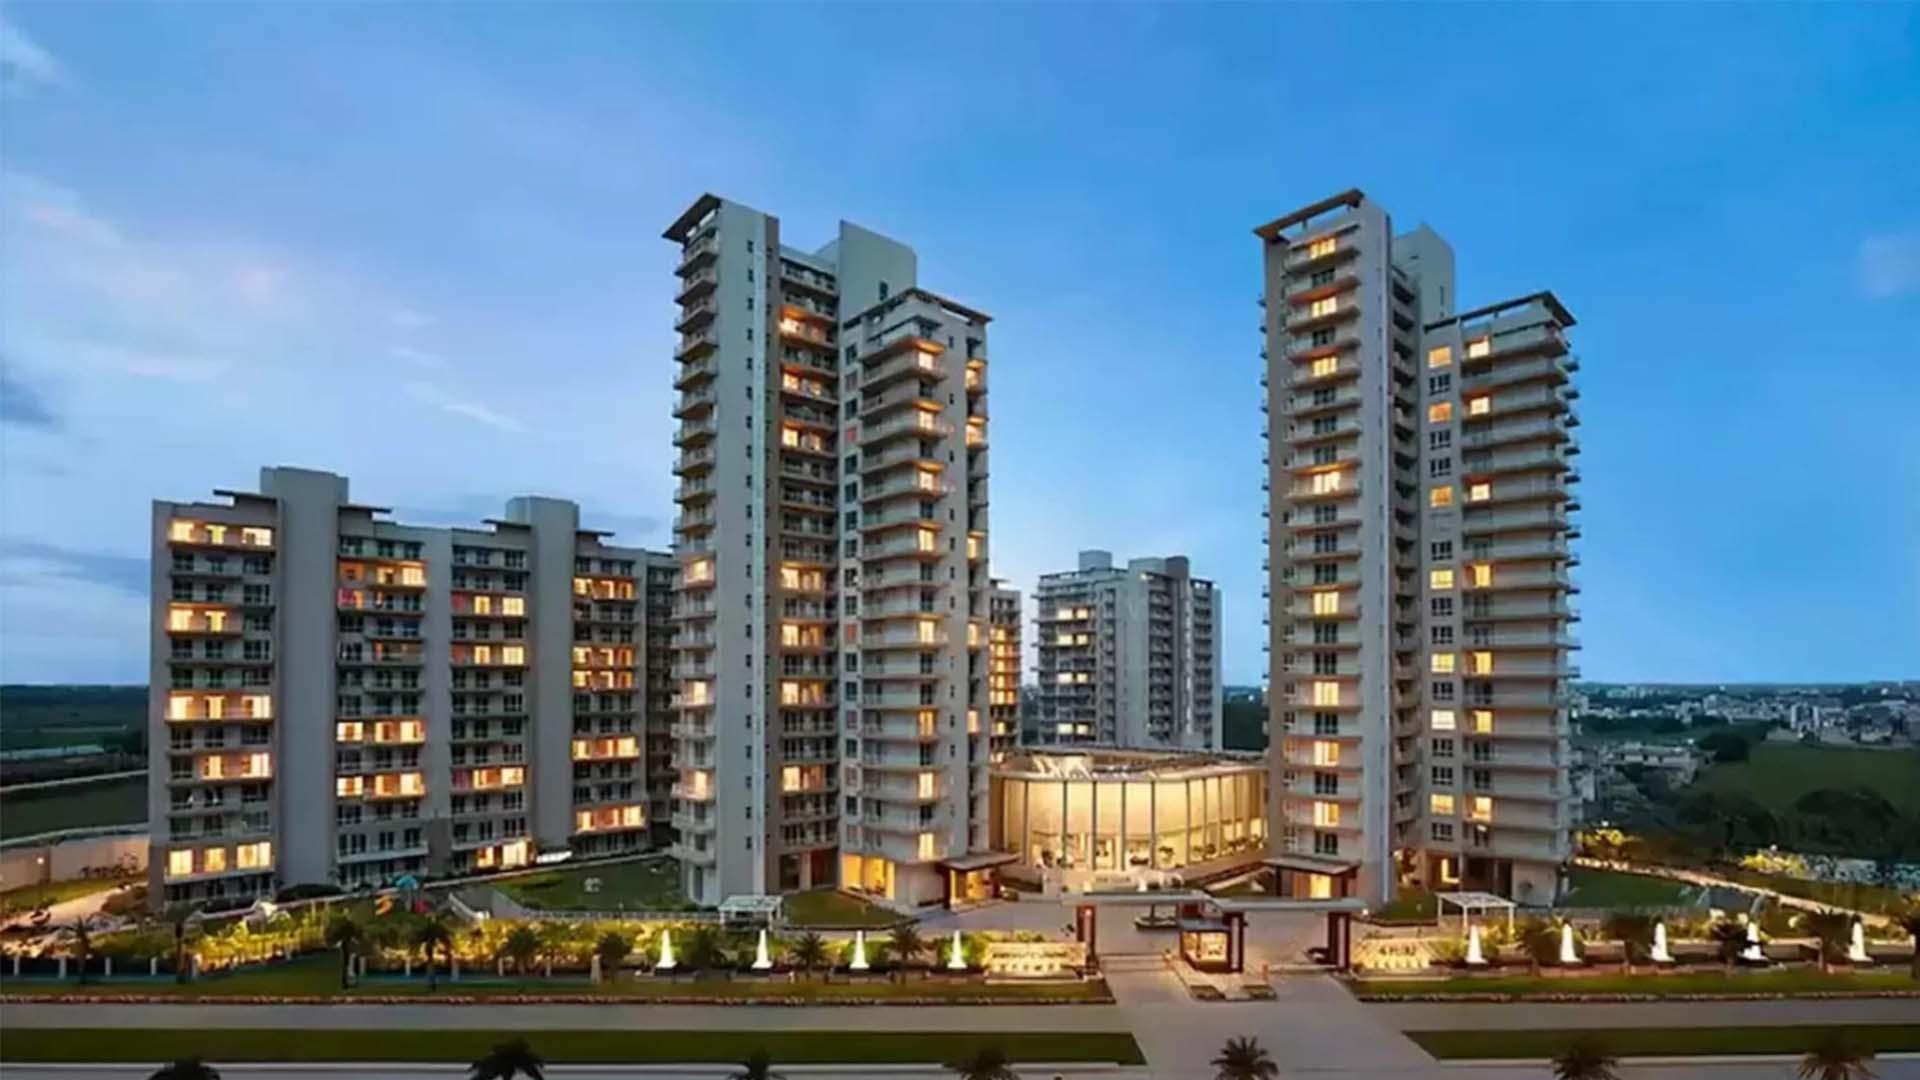 Property of 4BHK Flats in Gurgaon